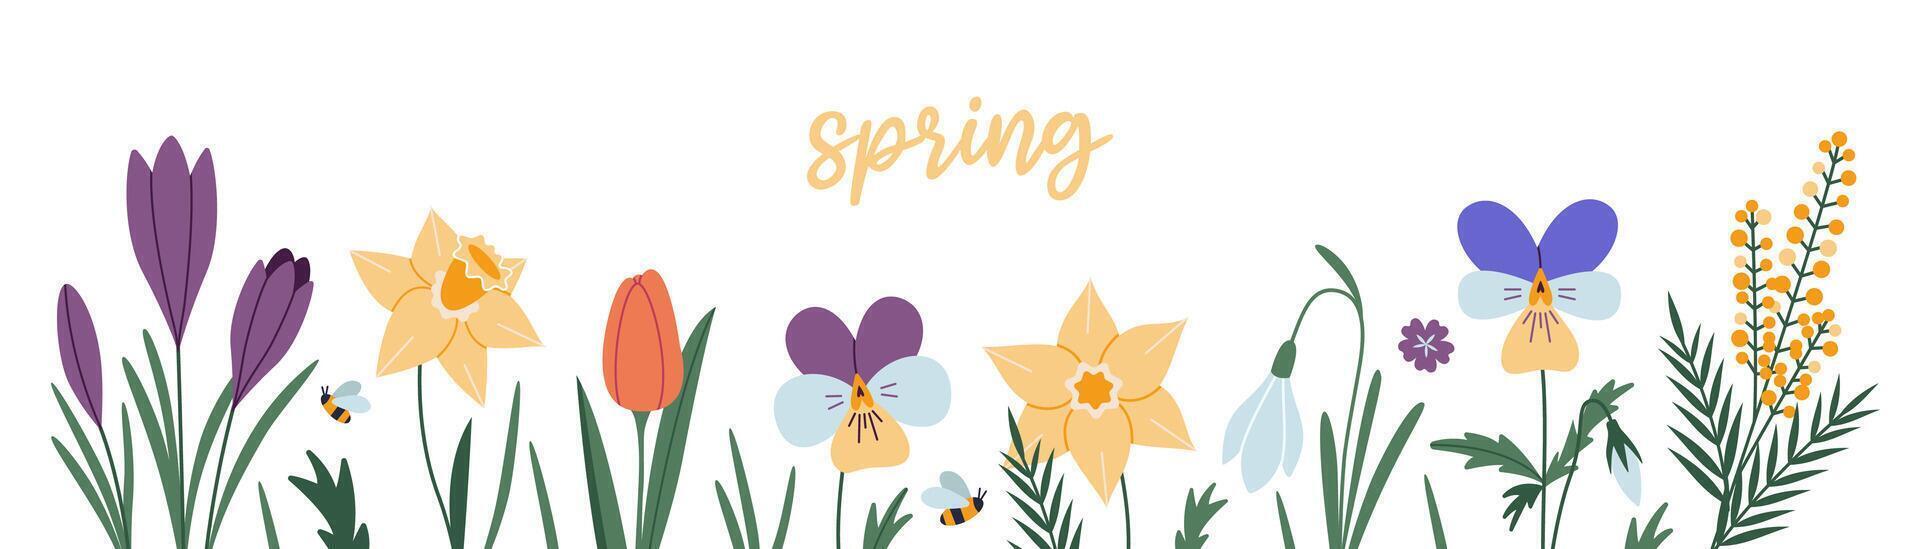 Set of various spring flowers, floral border, cartoon style. Trendy modern vector illustration isolated on white background, hand drawn, flat